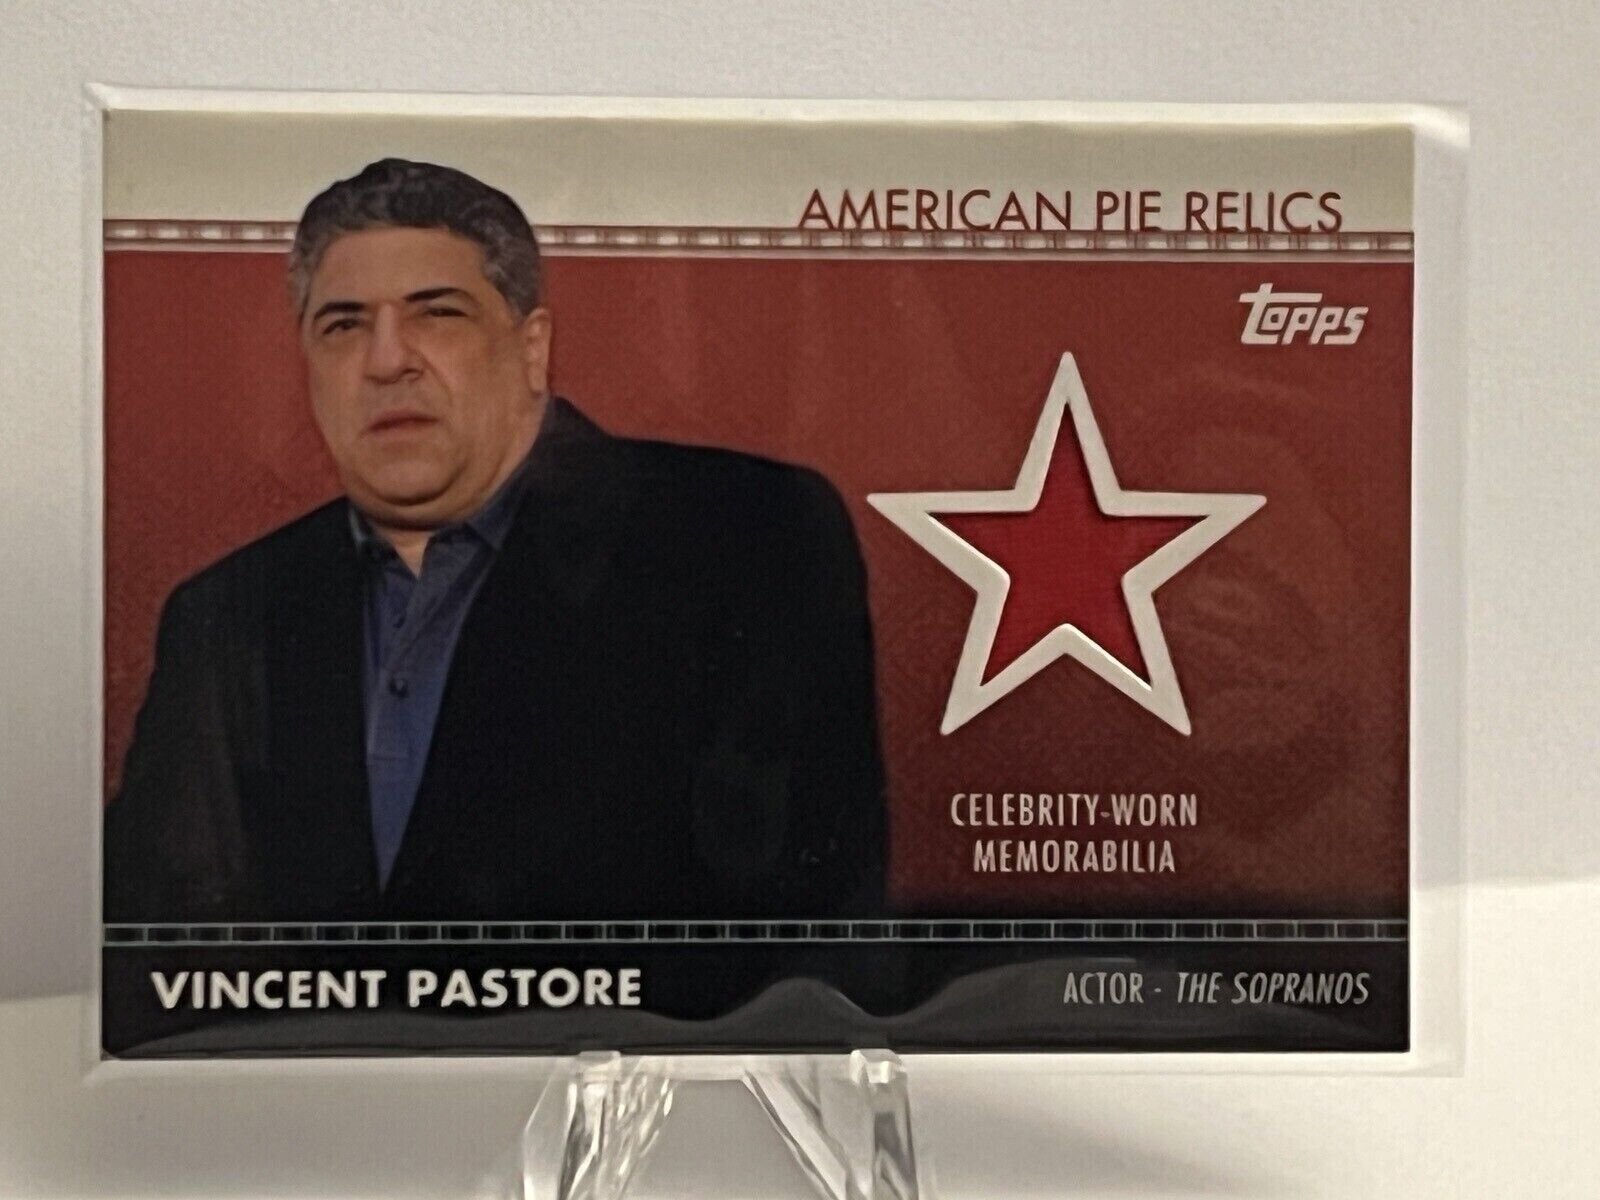 2011 Topps American Pie The Sopranos Vincent Pastore Worn Swatch Card